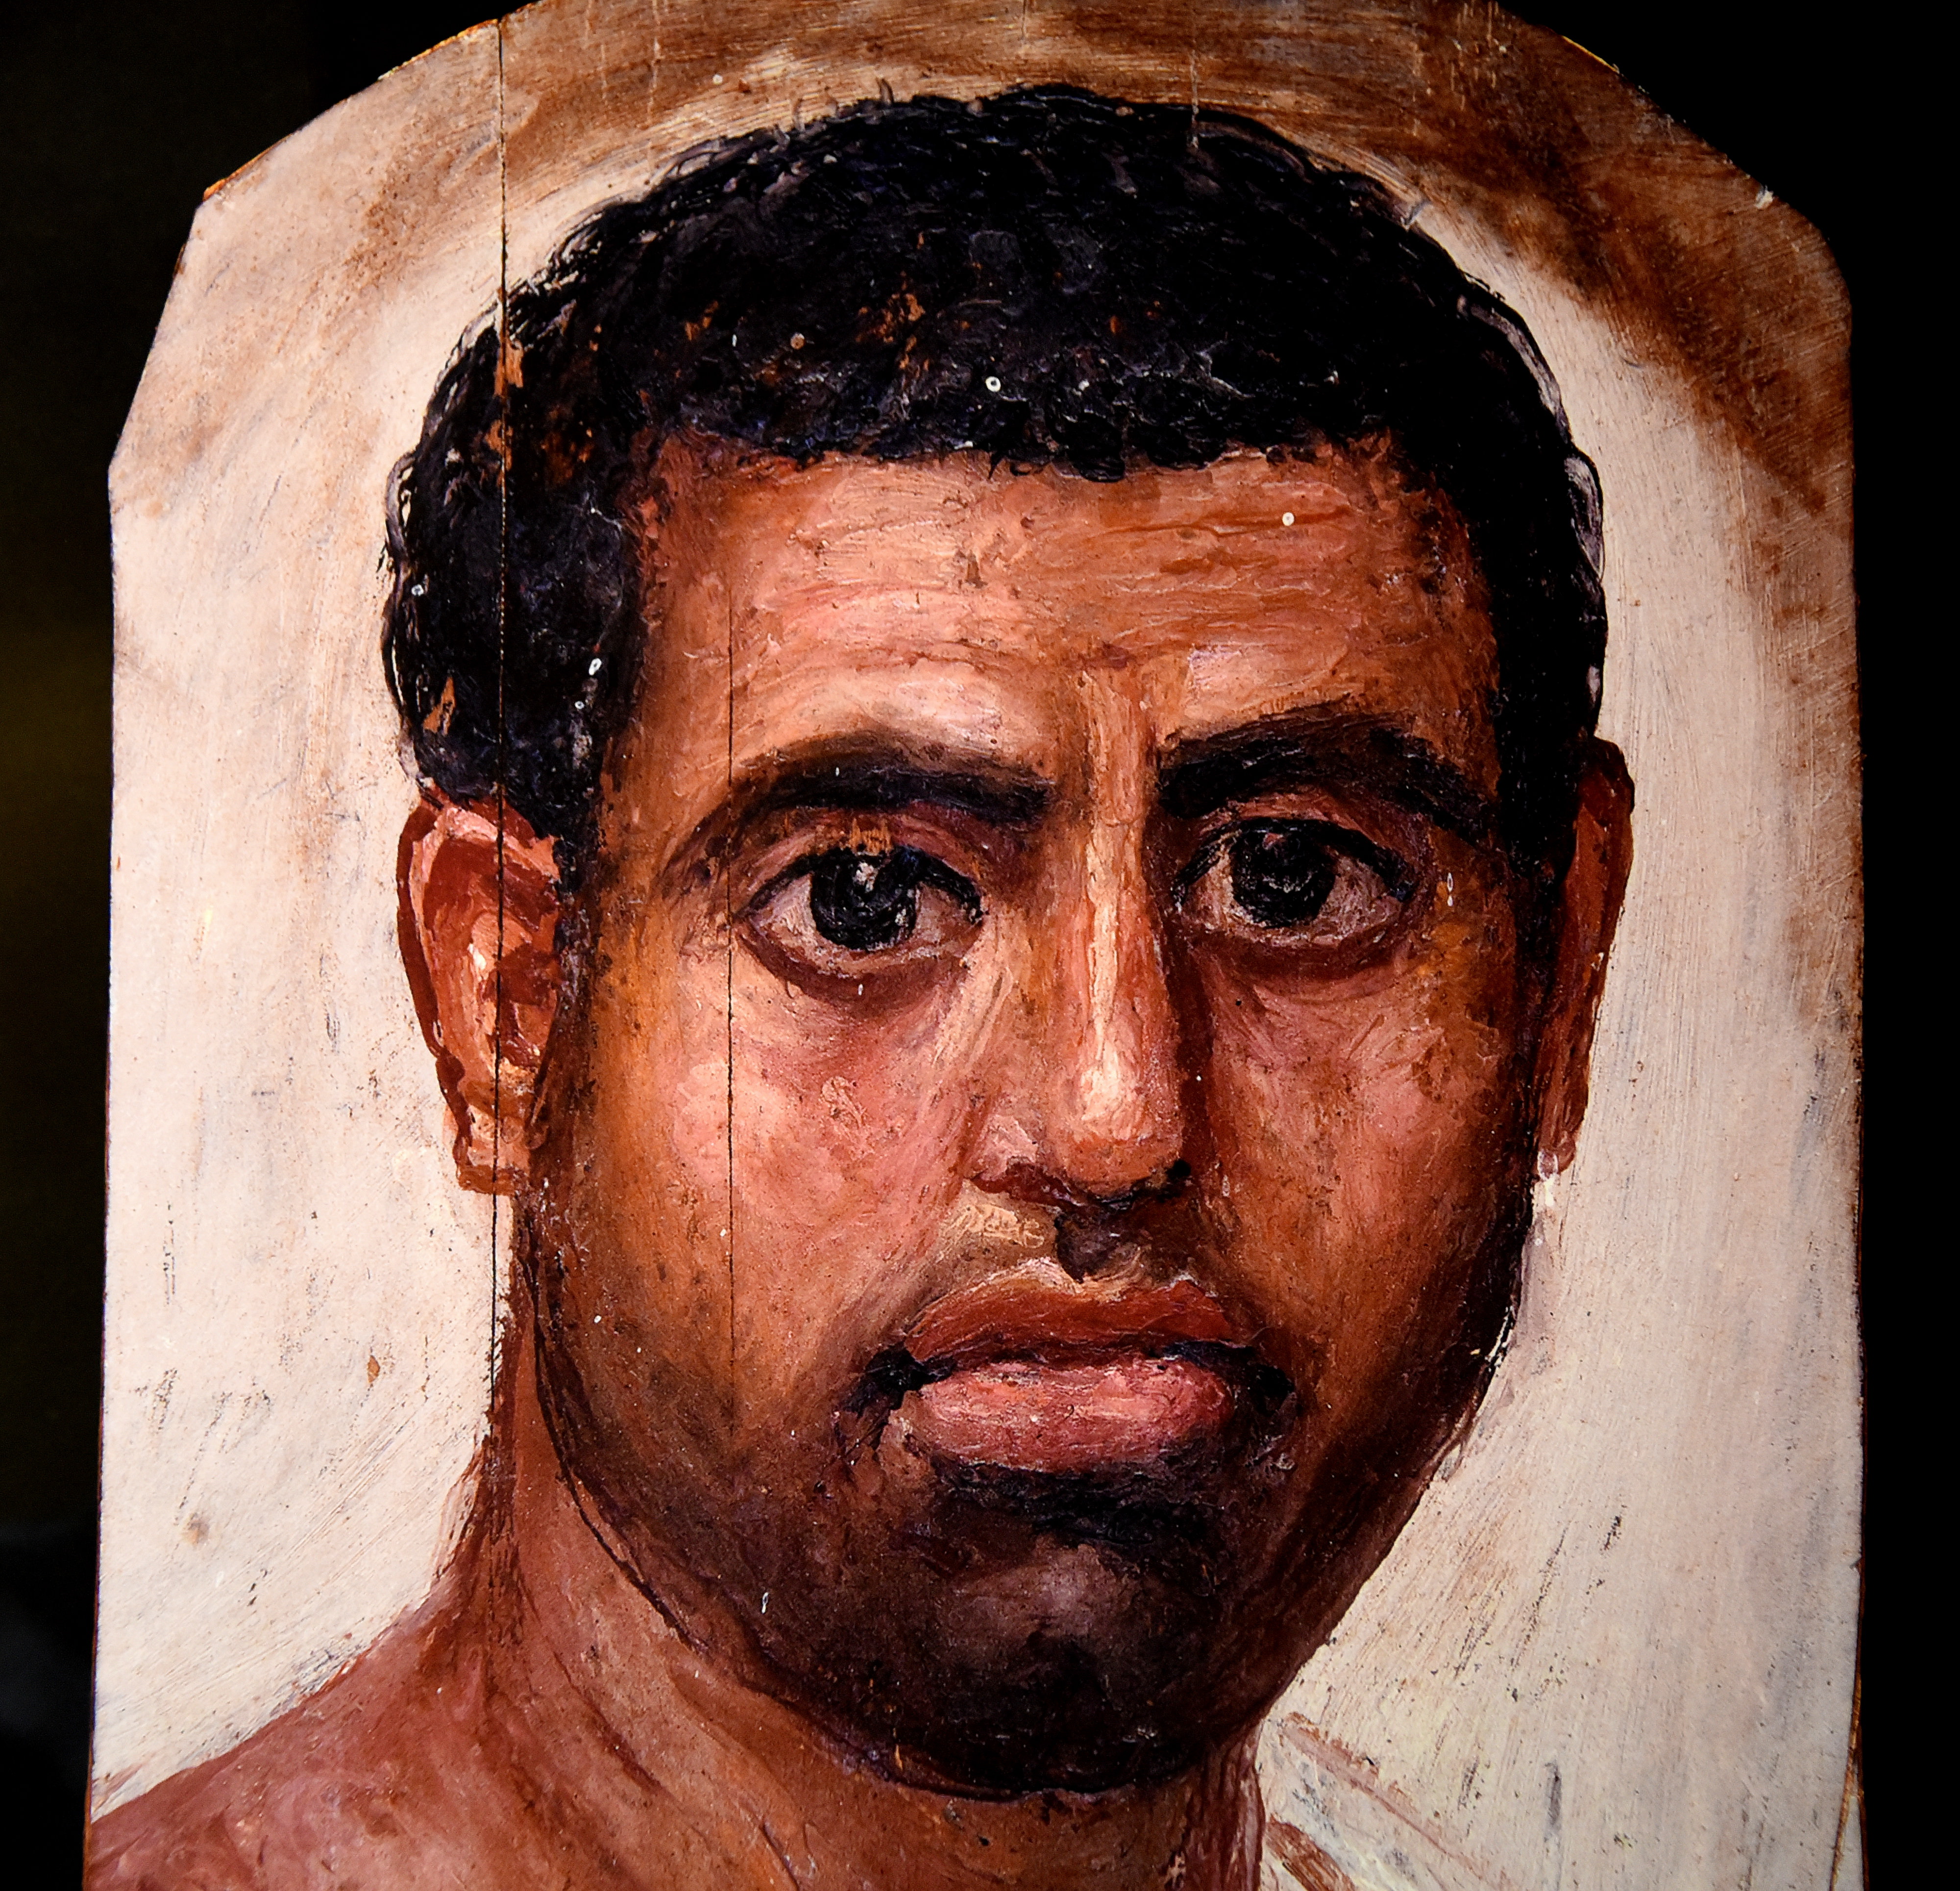 Mummy Portrait of a Man from Fayum (Illustration) - Ancient History ...